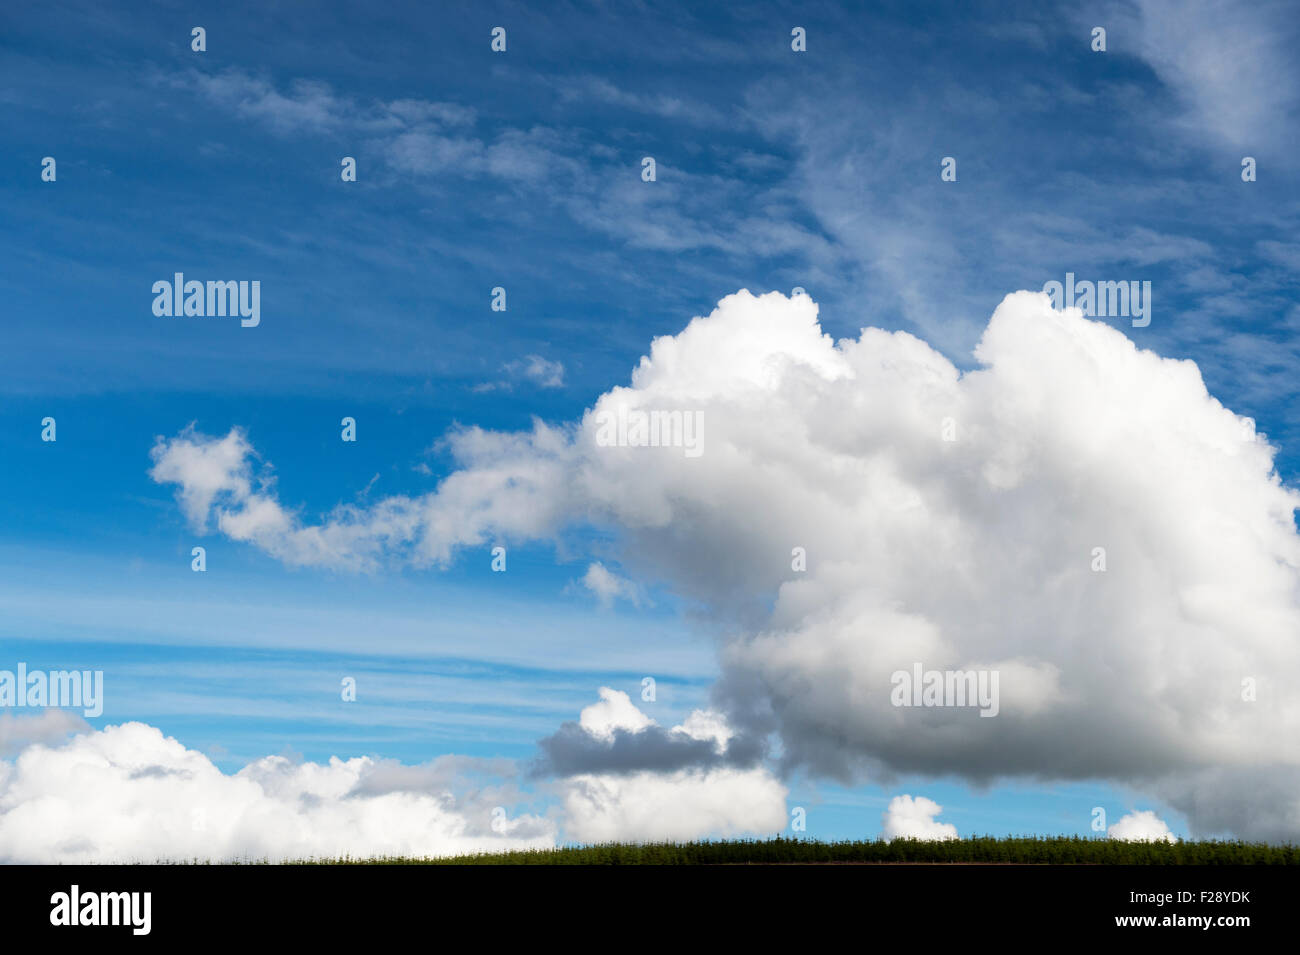 Cloud in the shape of an elephant in a blue sky Stock Photo